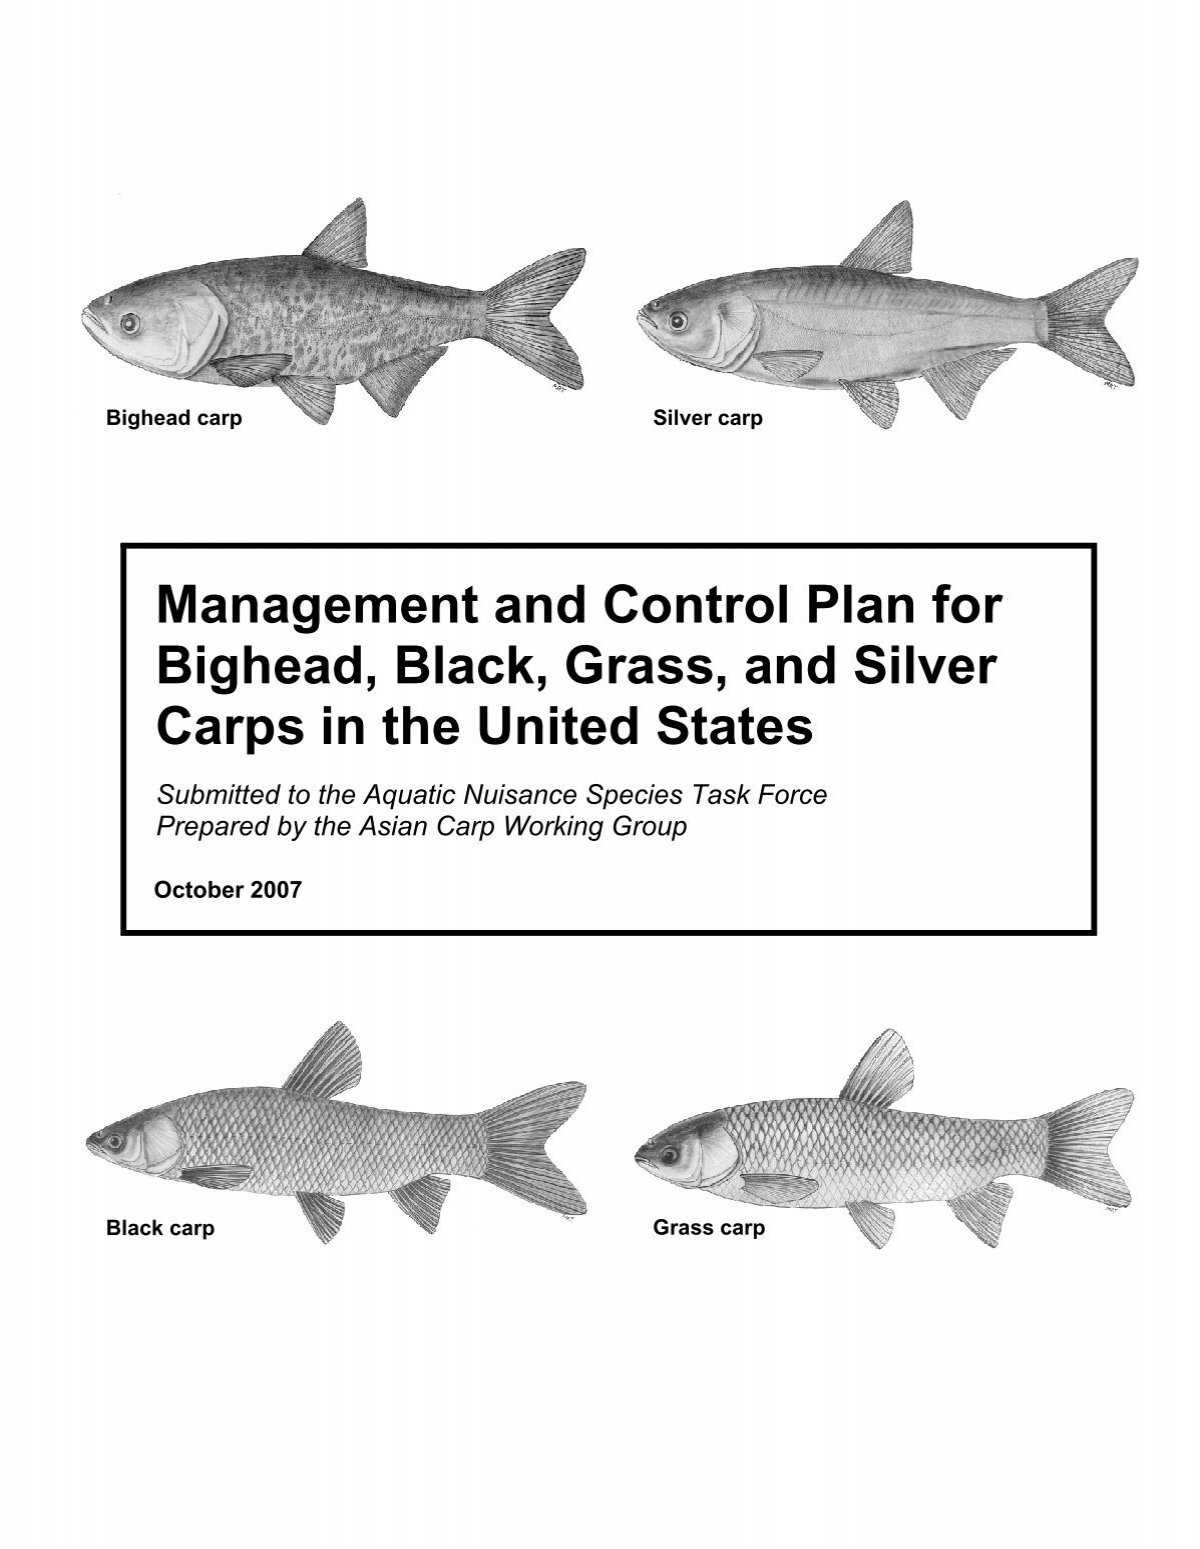 Management and Control Plan for Bighead, Black, Grass, and Silver